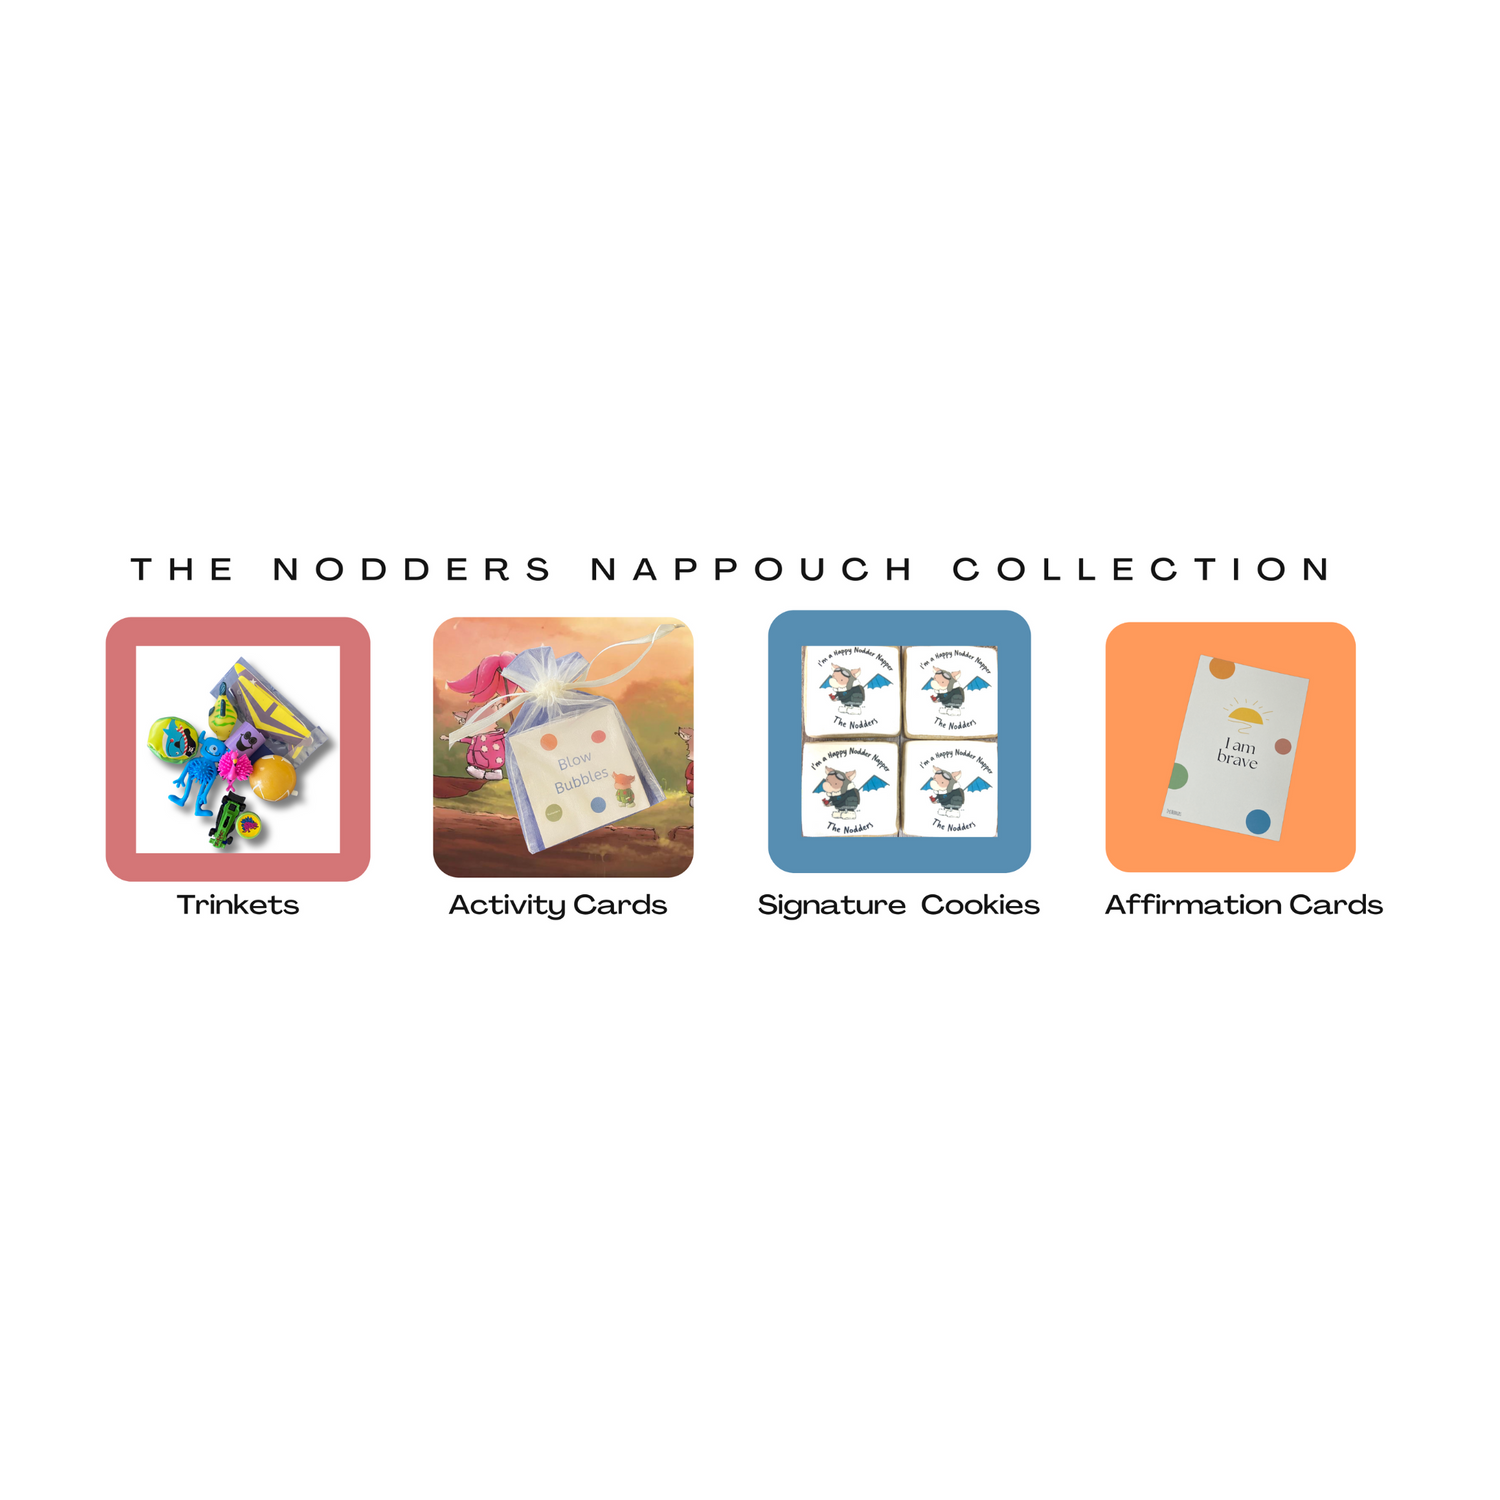 The NapPouch Collection